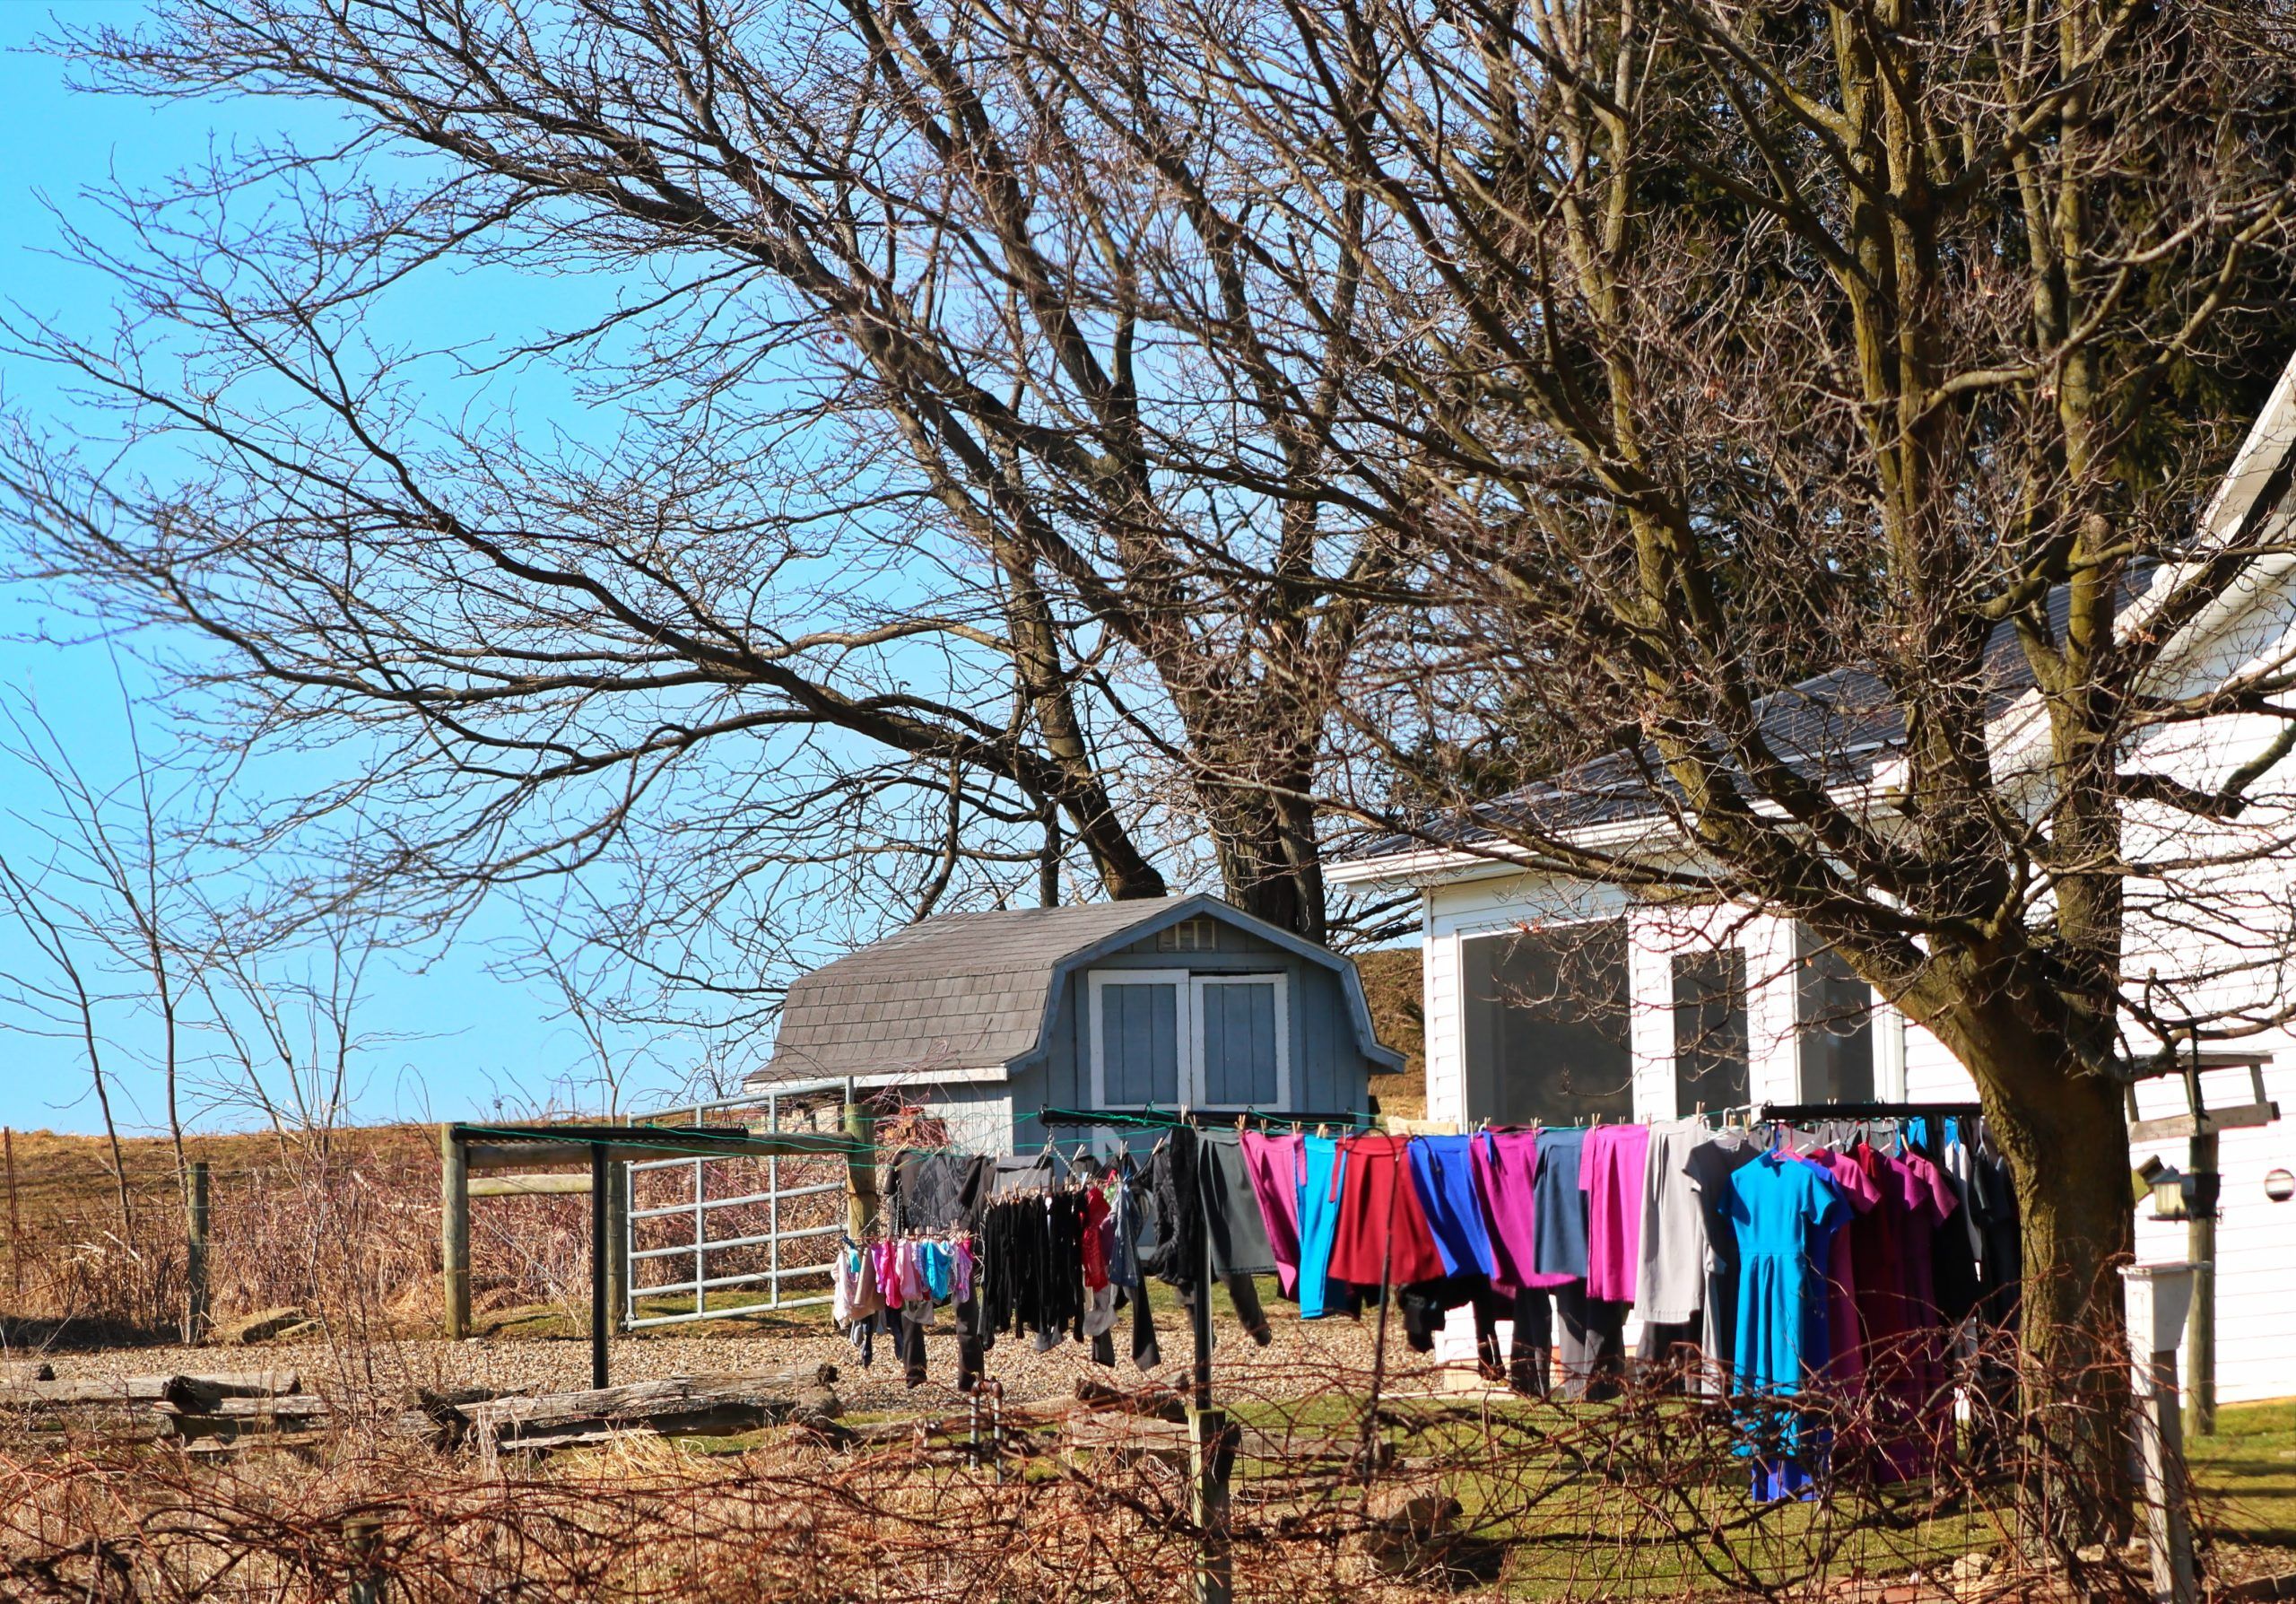 Laundry Hanging Outside in Amish Country